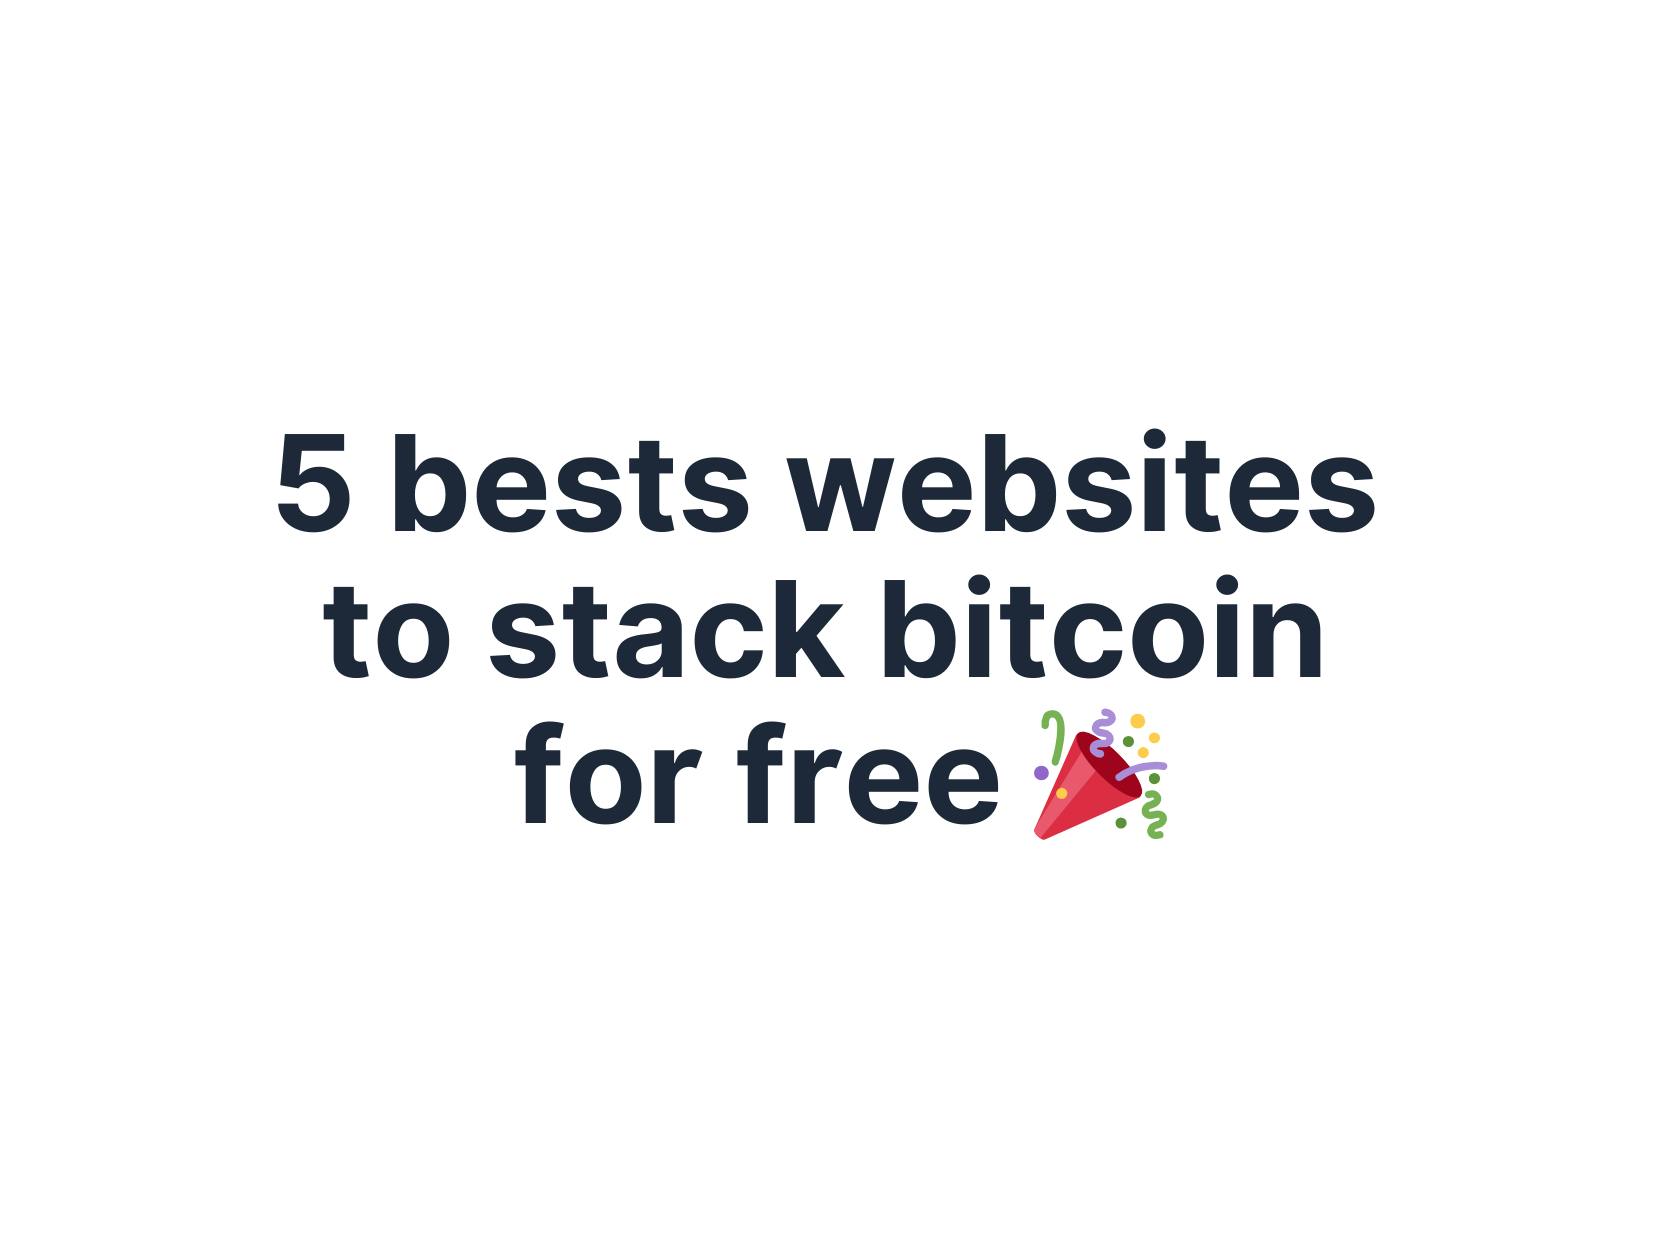 5 bests websites to stack bitcoin for free